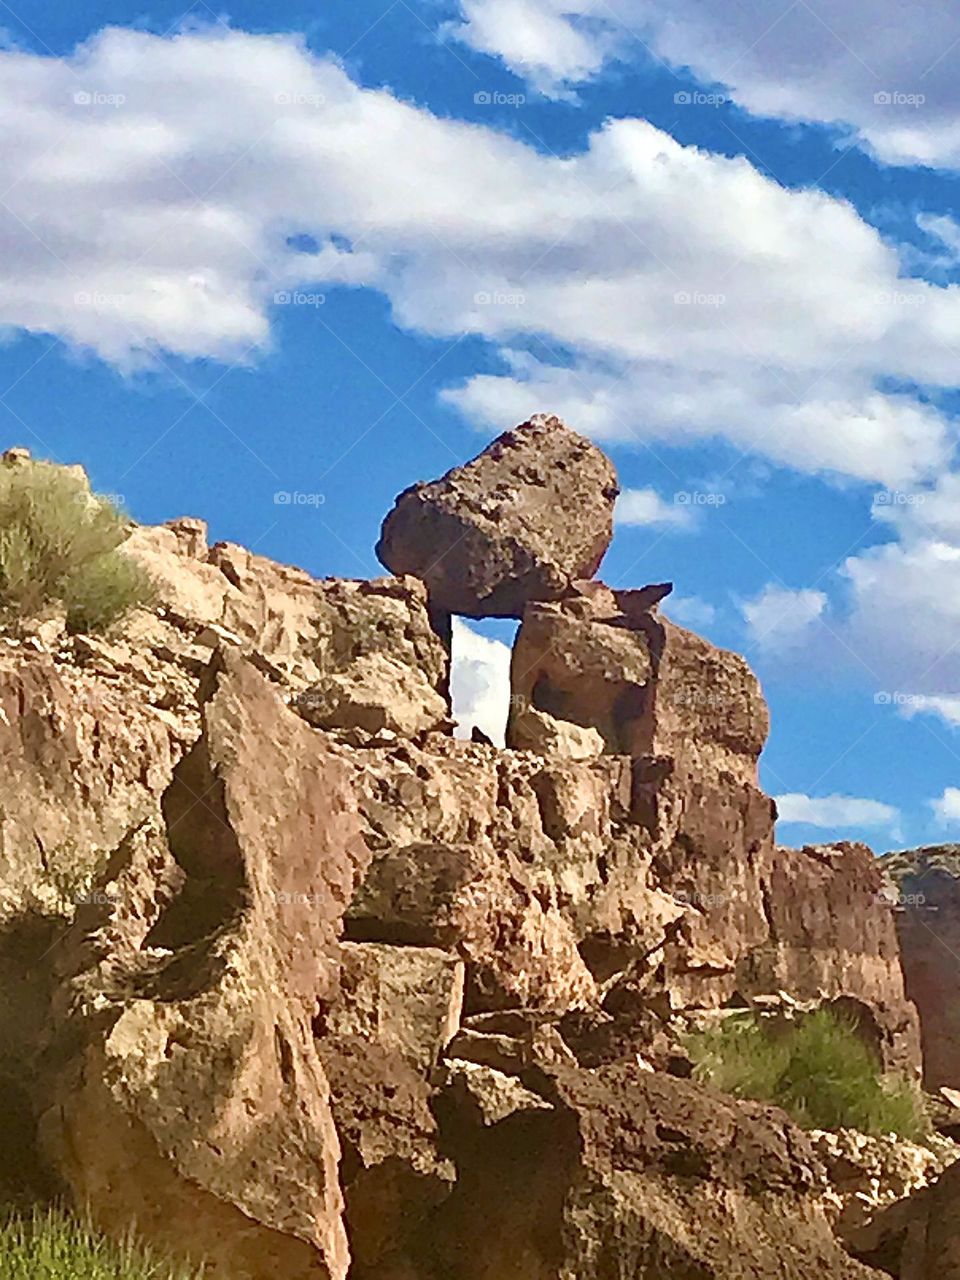 Natural window in Marble Canyon